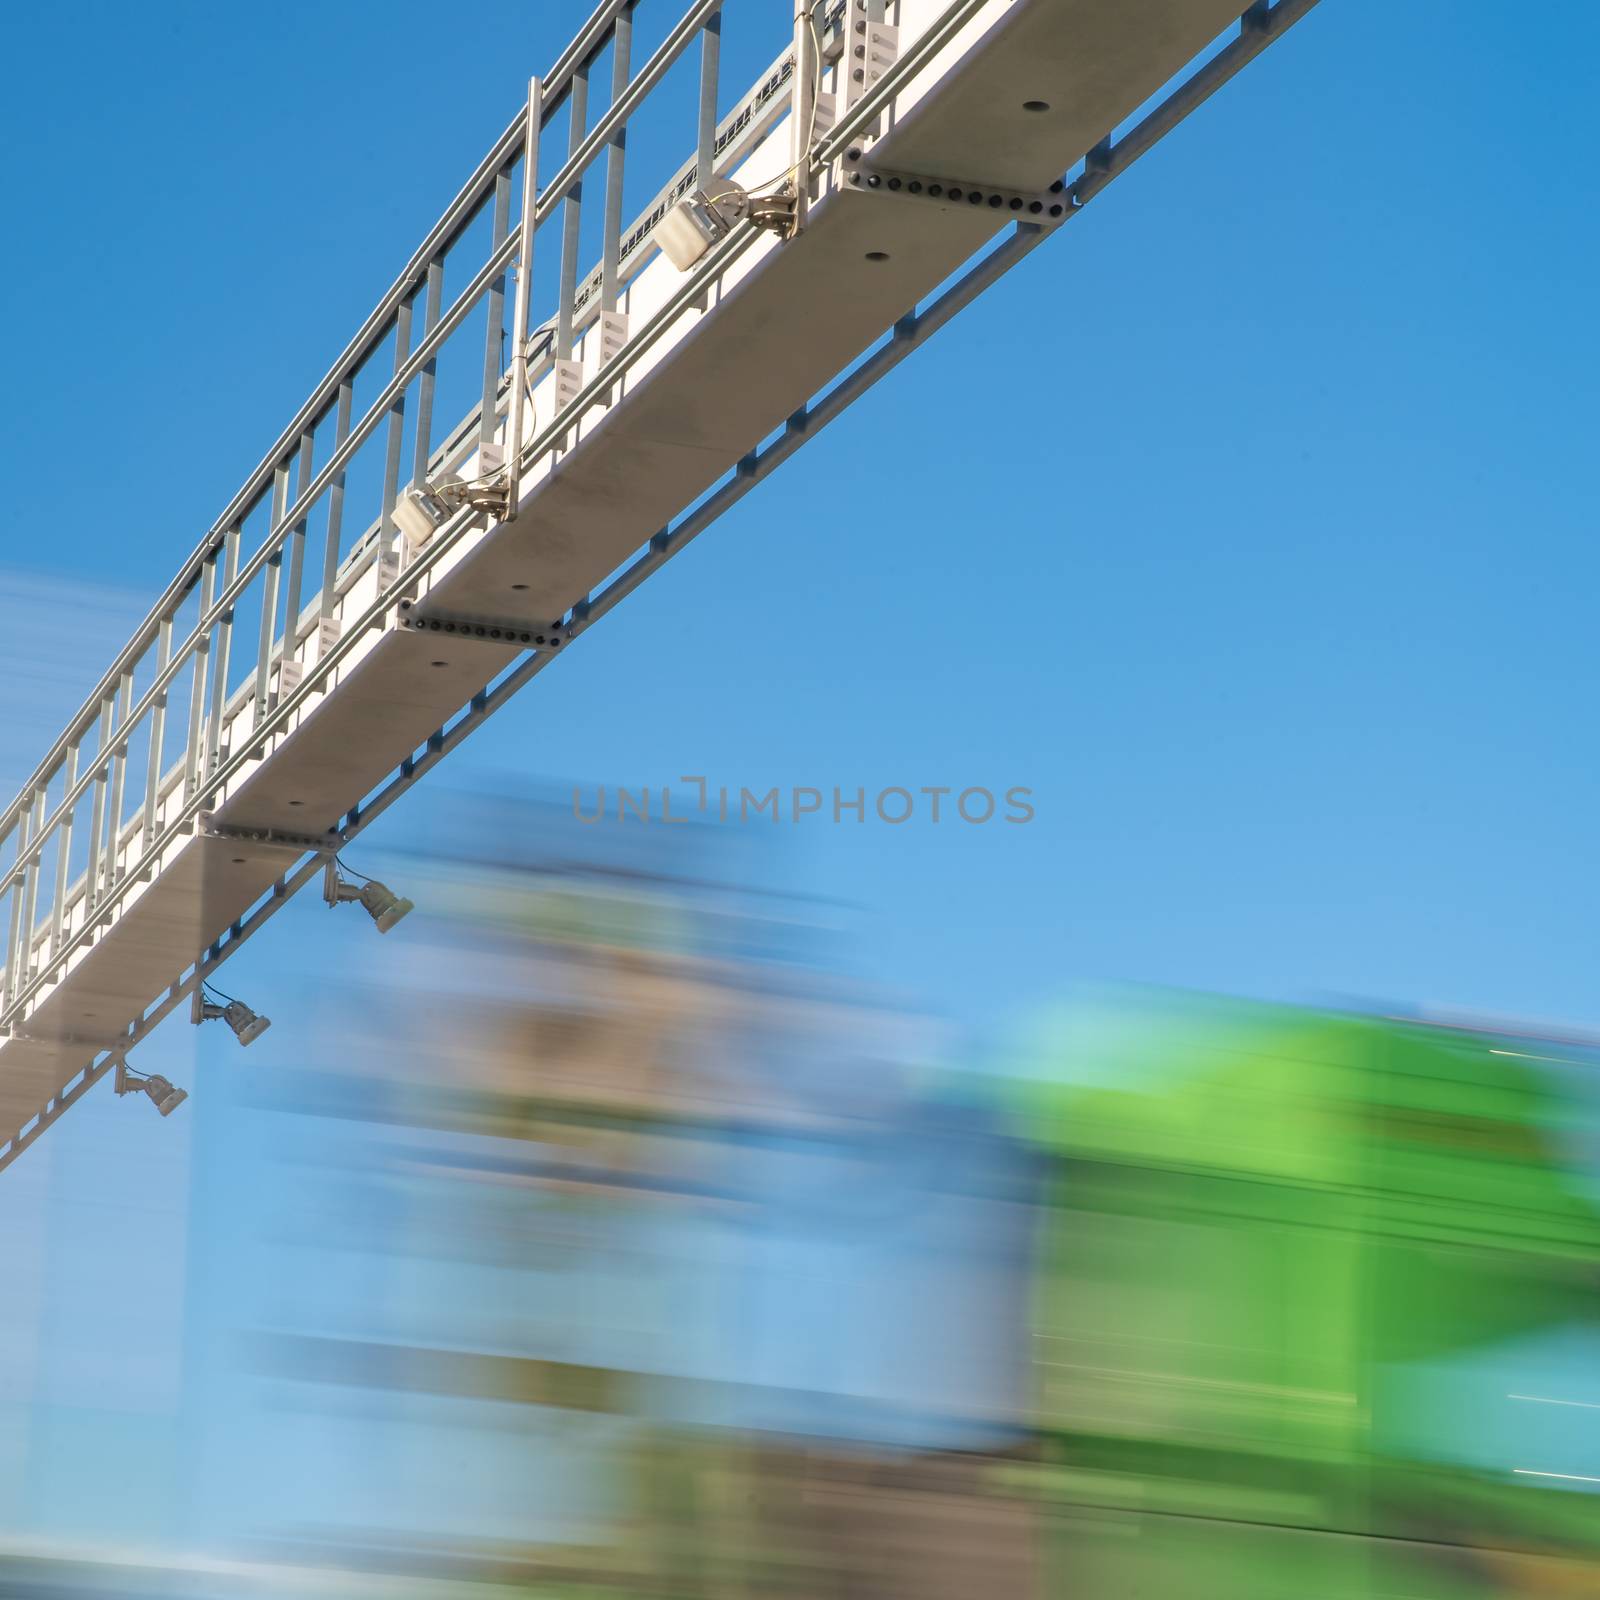 truck drive through the highway through the toll gate, toll charges, blurred motion in the image by Edophoto